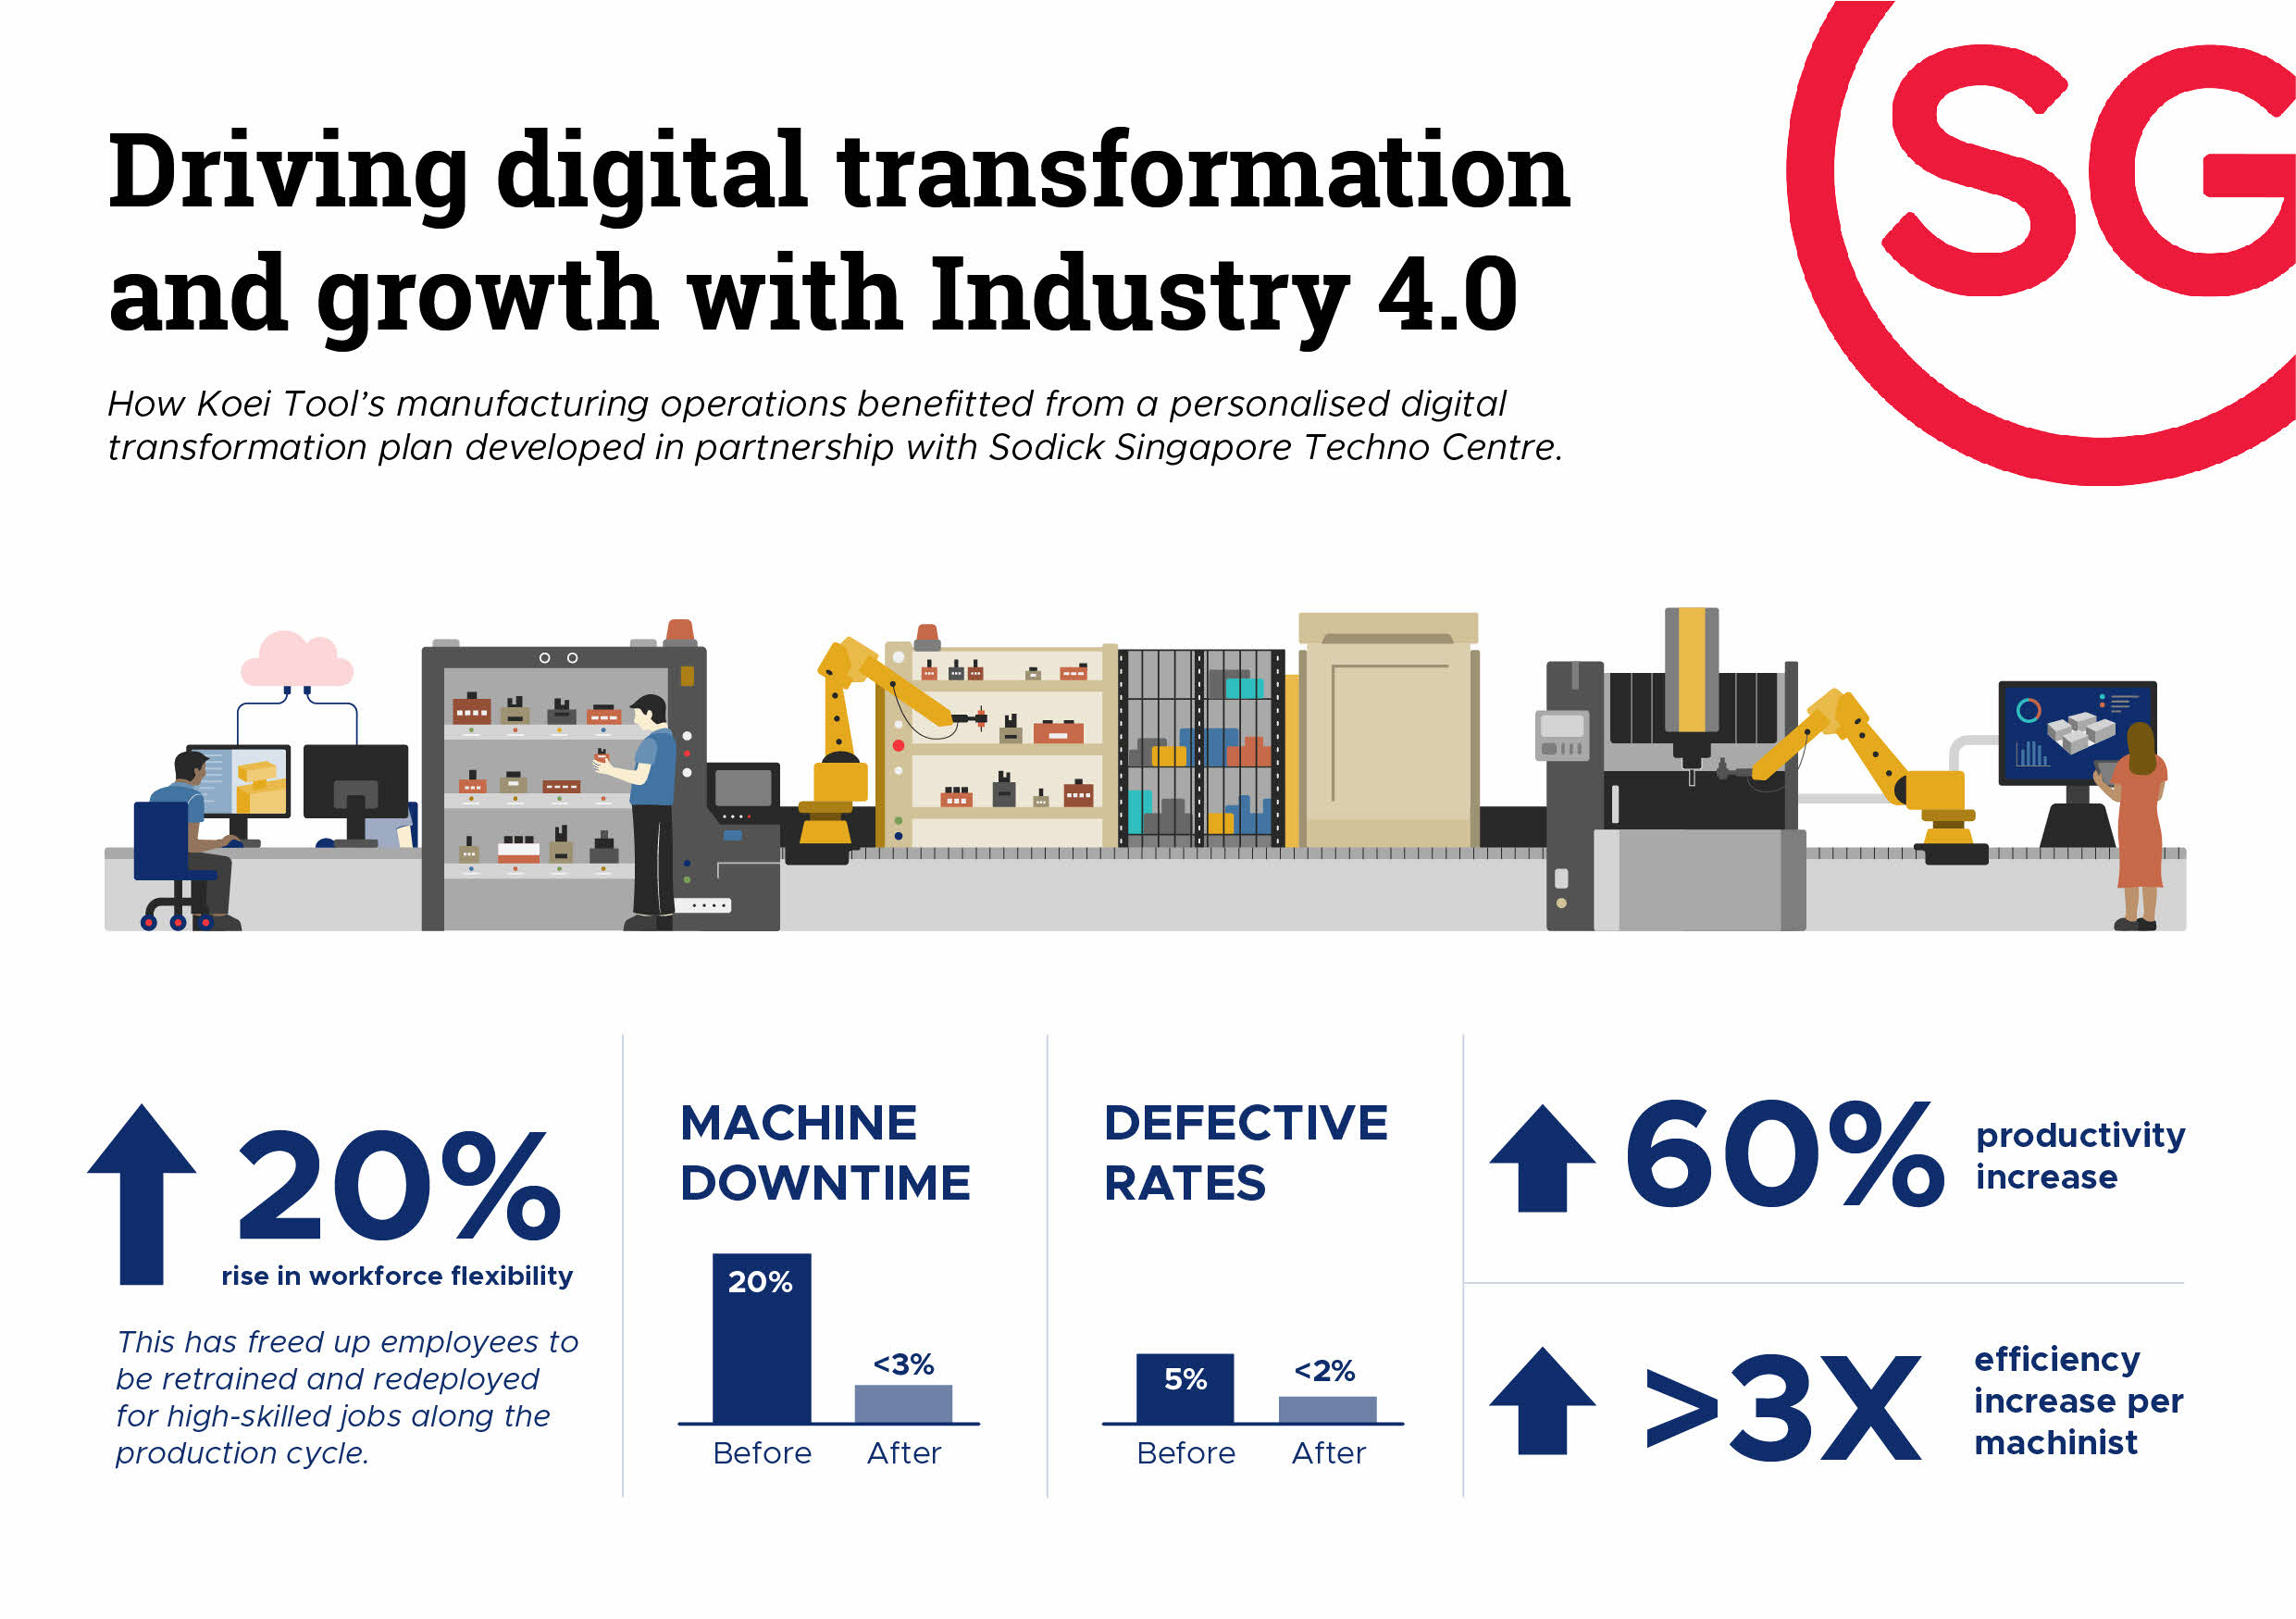 Infographic illustrating how Koei Tool's manufacturing operations benefited from transformation plan developed with Sodick Singapore Techno Centre at Jurong Innovation District